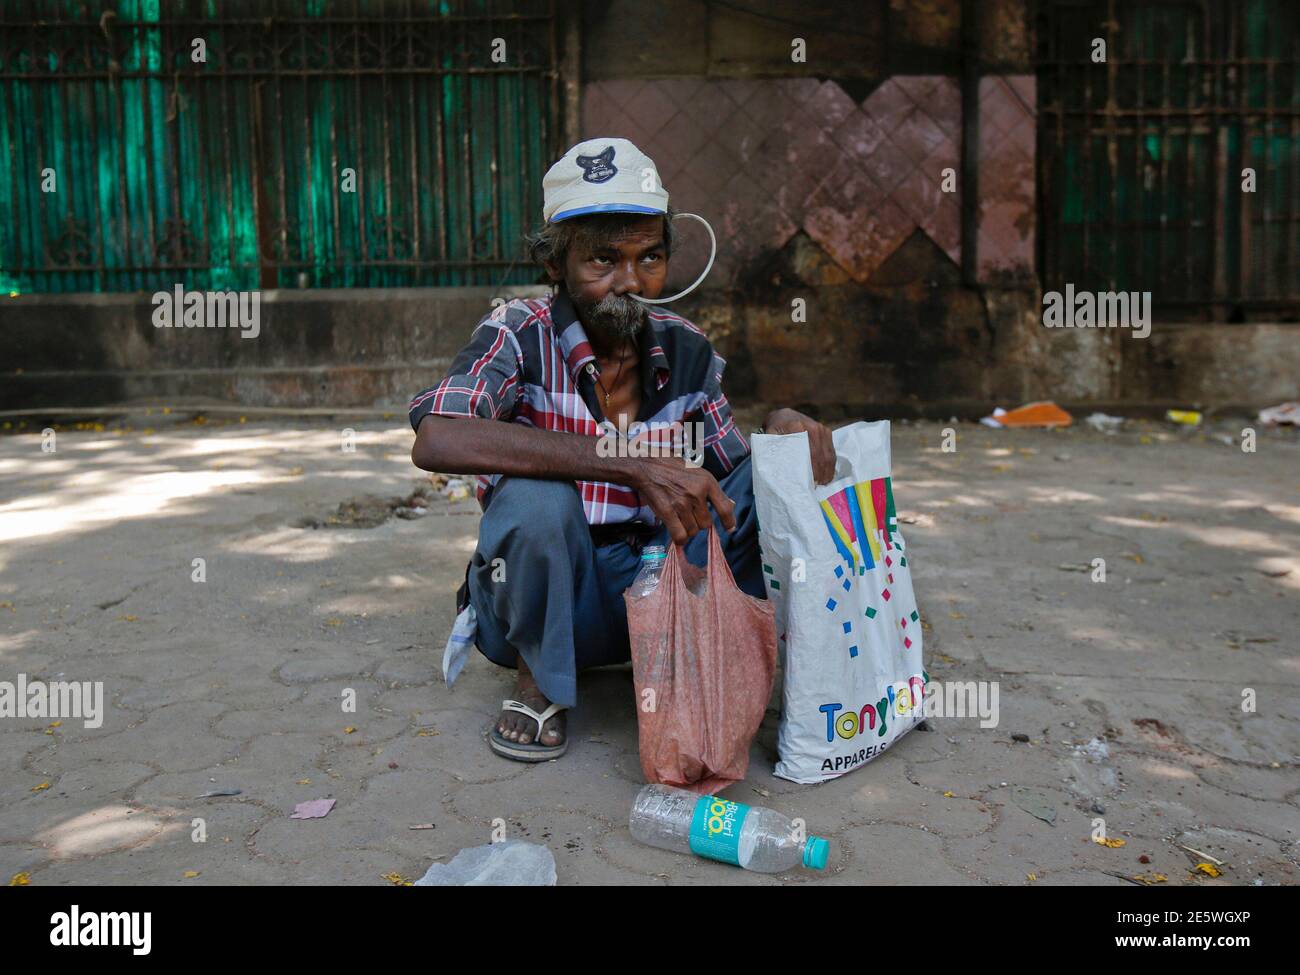 Cancer patient Philip Mokal sits on a pavement outside the Tata Memorial Hospital in Mumbai April 2, 2013. India's top court dismissed Swiss drugmaker Novartis AG's attempt to win patent protection for its cancer drug Glivec, a blow to Western pharmaceutical firms targeting India to drive sales and a victory for local makers of cheap generics. REUTERS/Vivek Prakash (INDIA - Tags: BUSINESS DRUGS SOCIETY HEALTH) Stock Photo